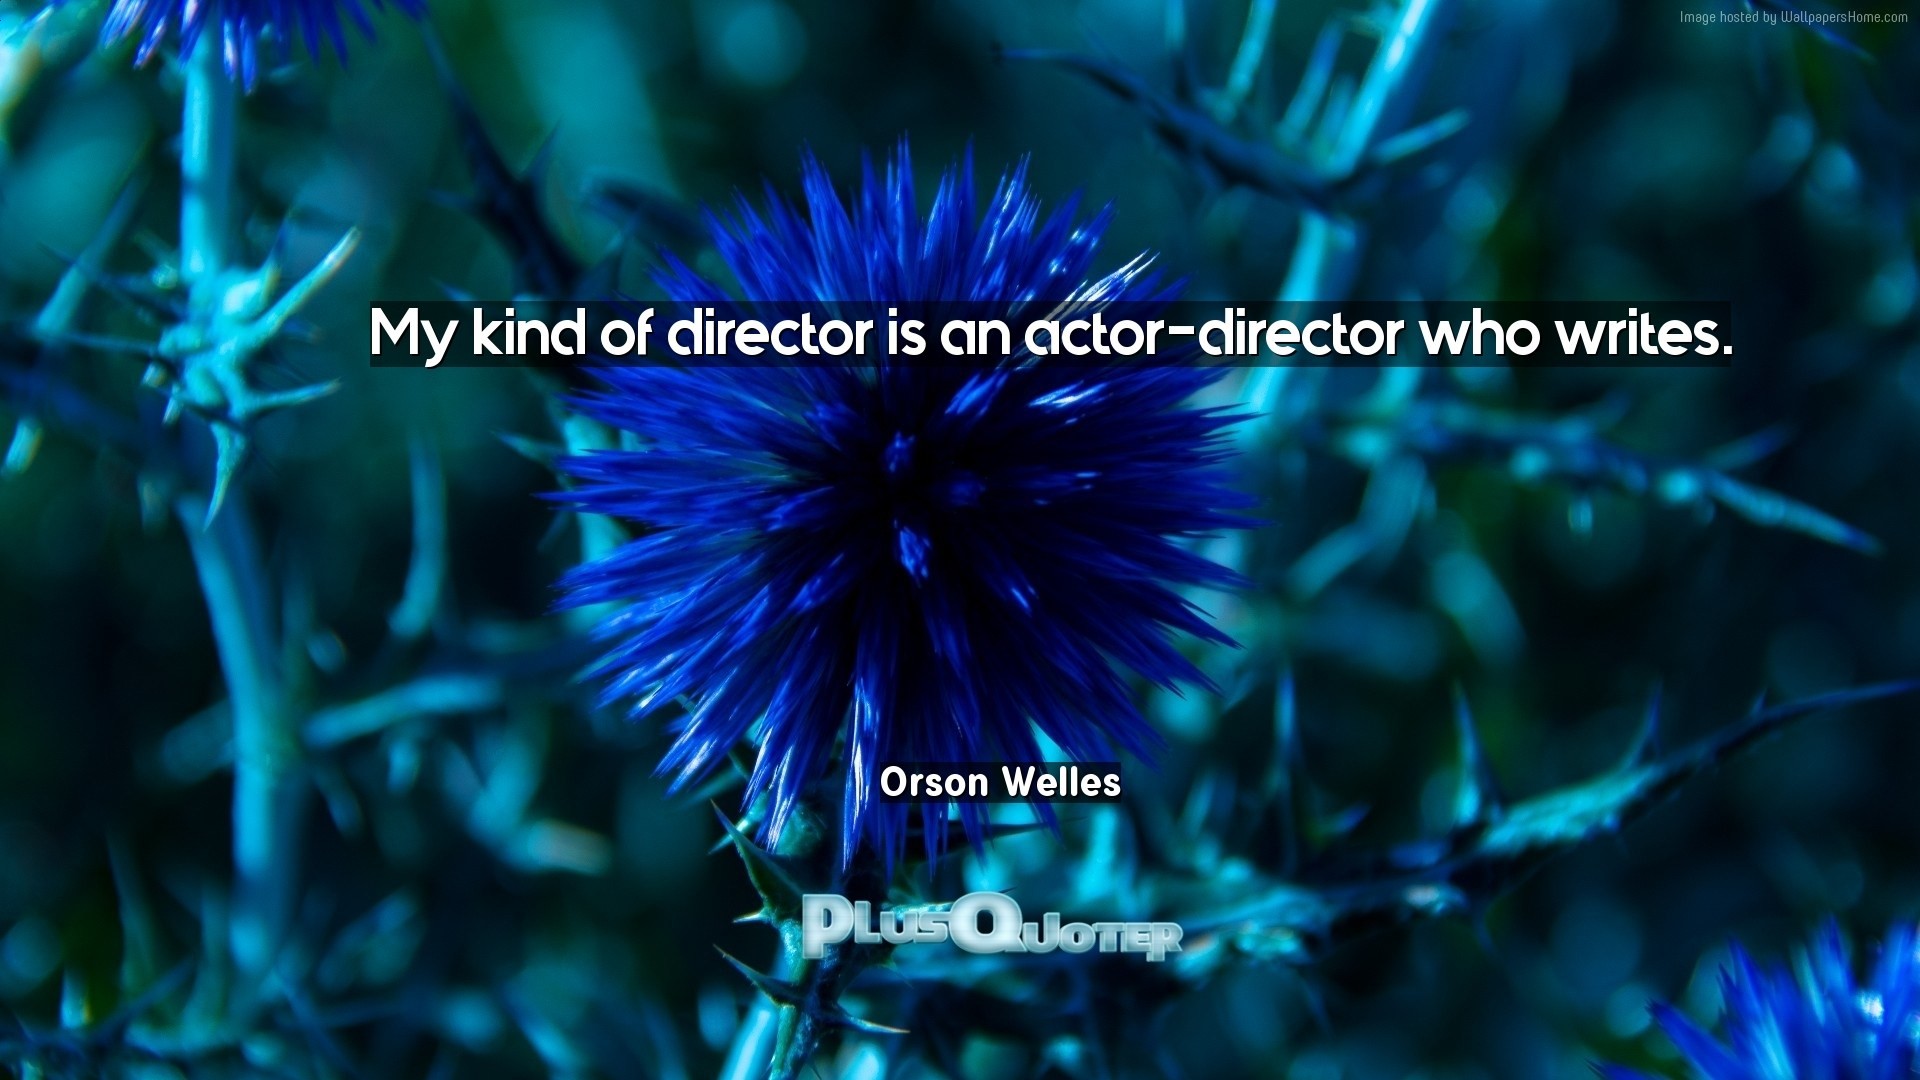 1920x1080 Download Wallpaper with inspirational Quotes- "My kind of director is an  actor-director